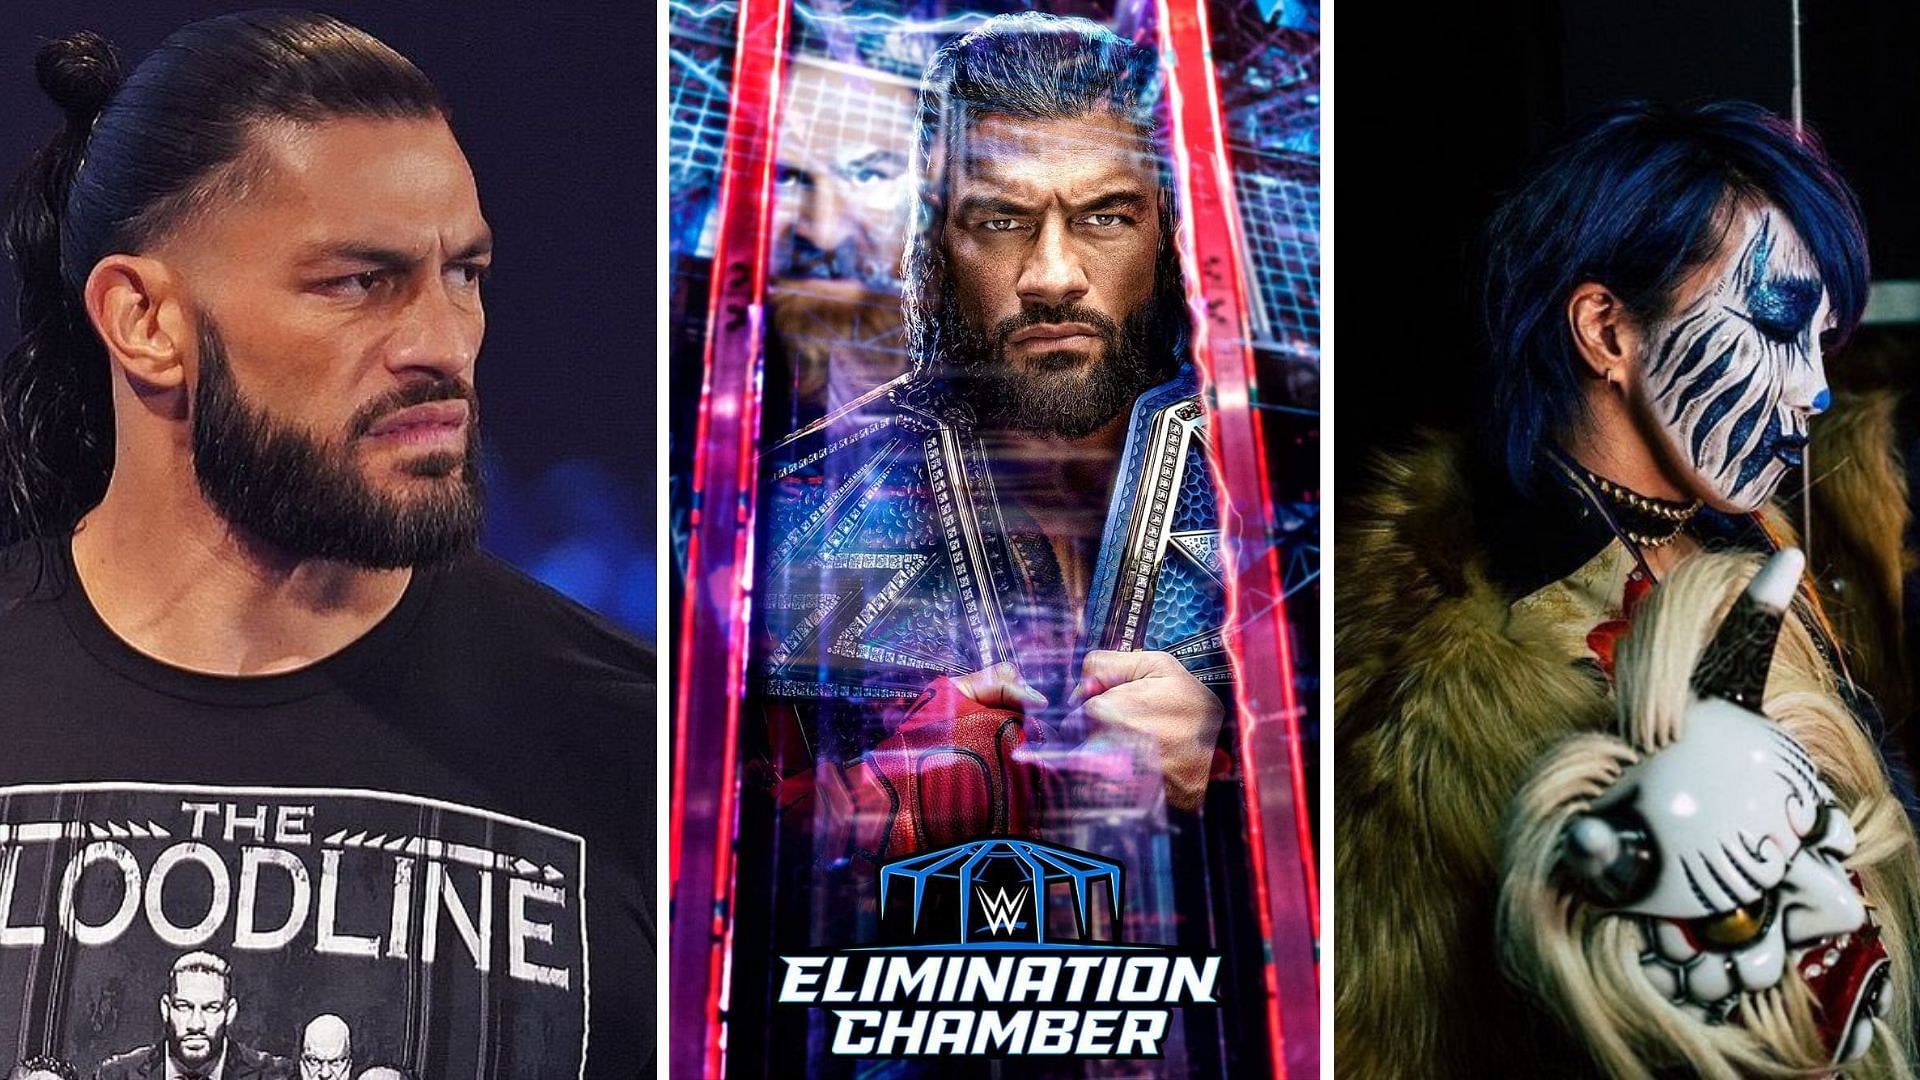 WWE Elimination Chamber 2023 could include some interesting character changes